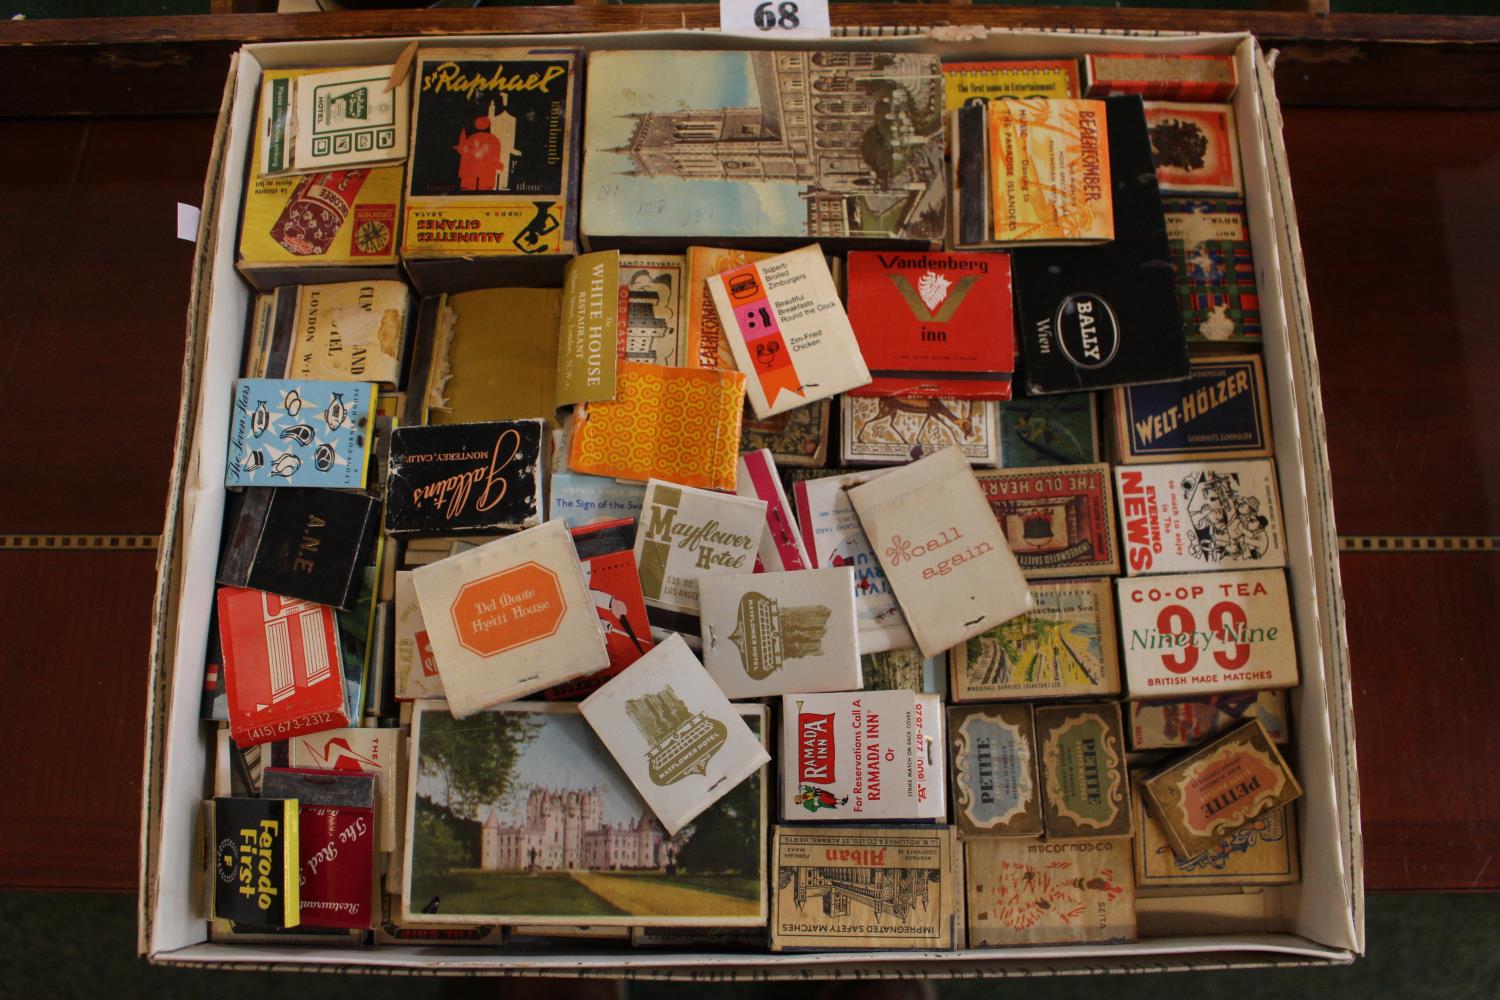 Collection of assorted Match books, 6 Whitebread Tankards, Cast Iron Kettle and assorted ceramics - Image 3 of 3